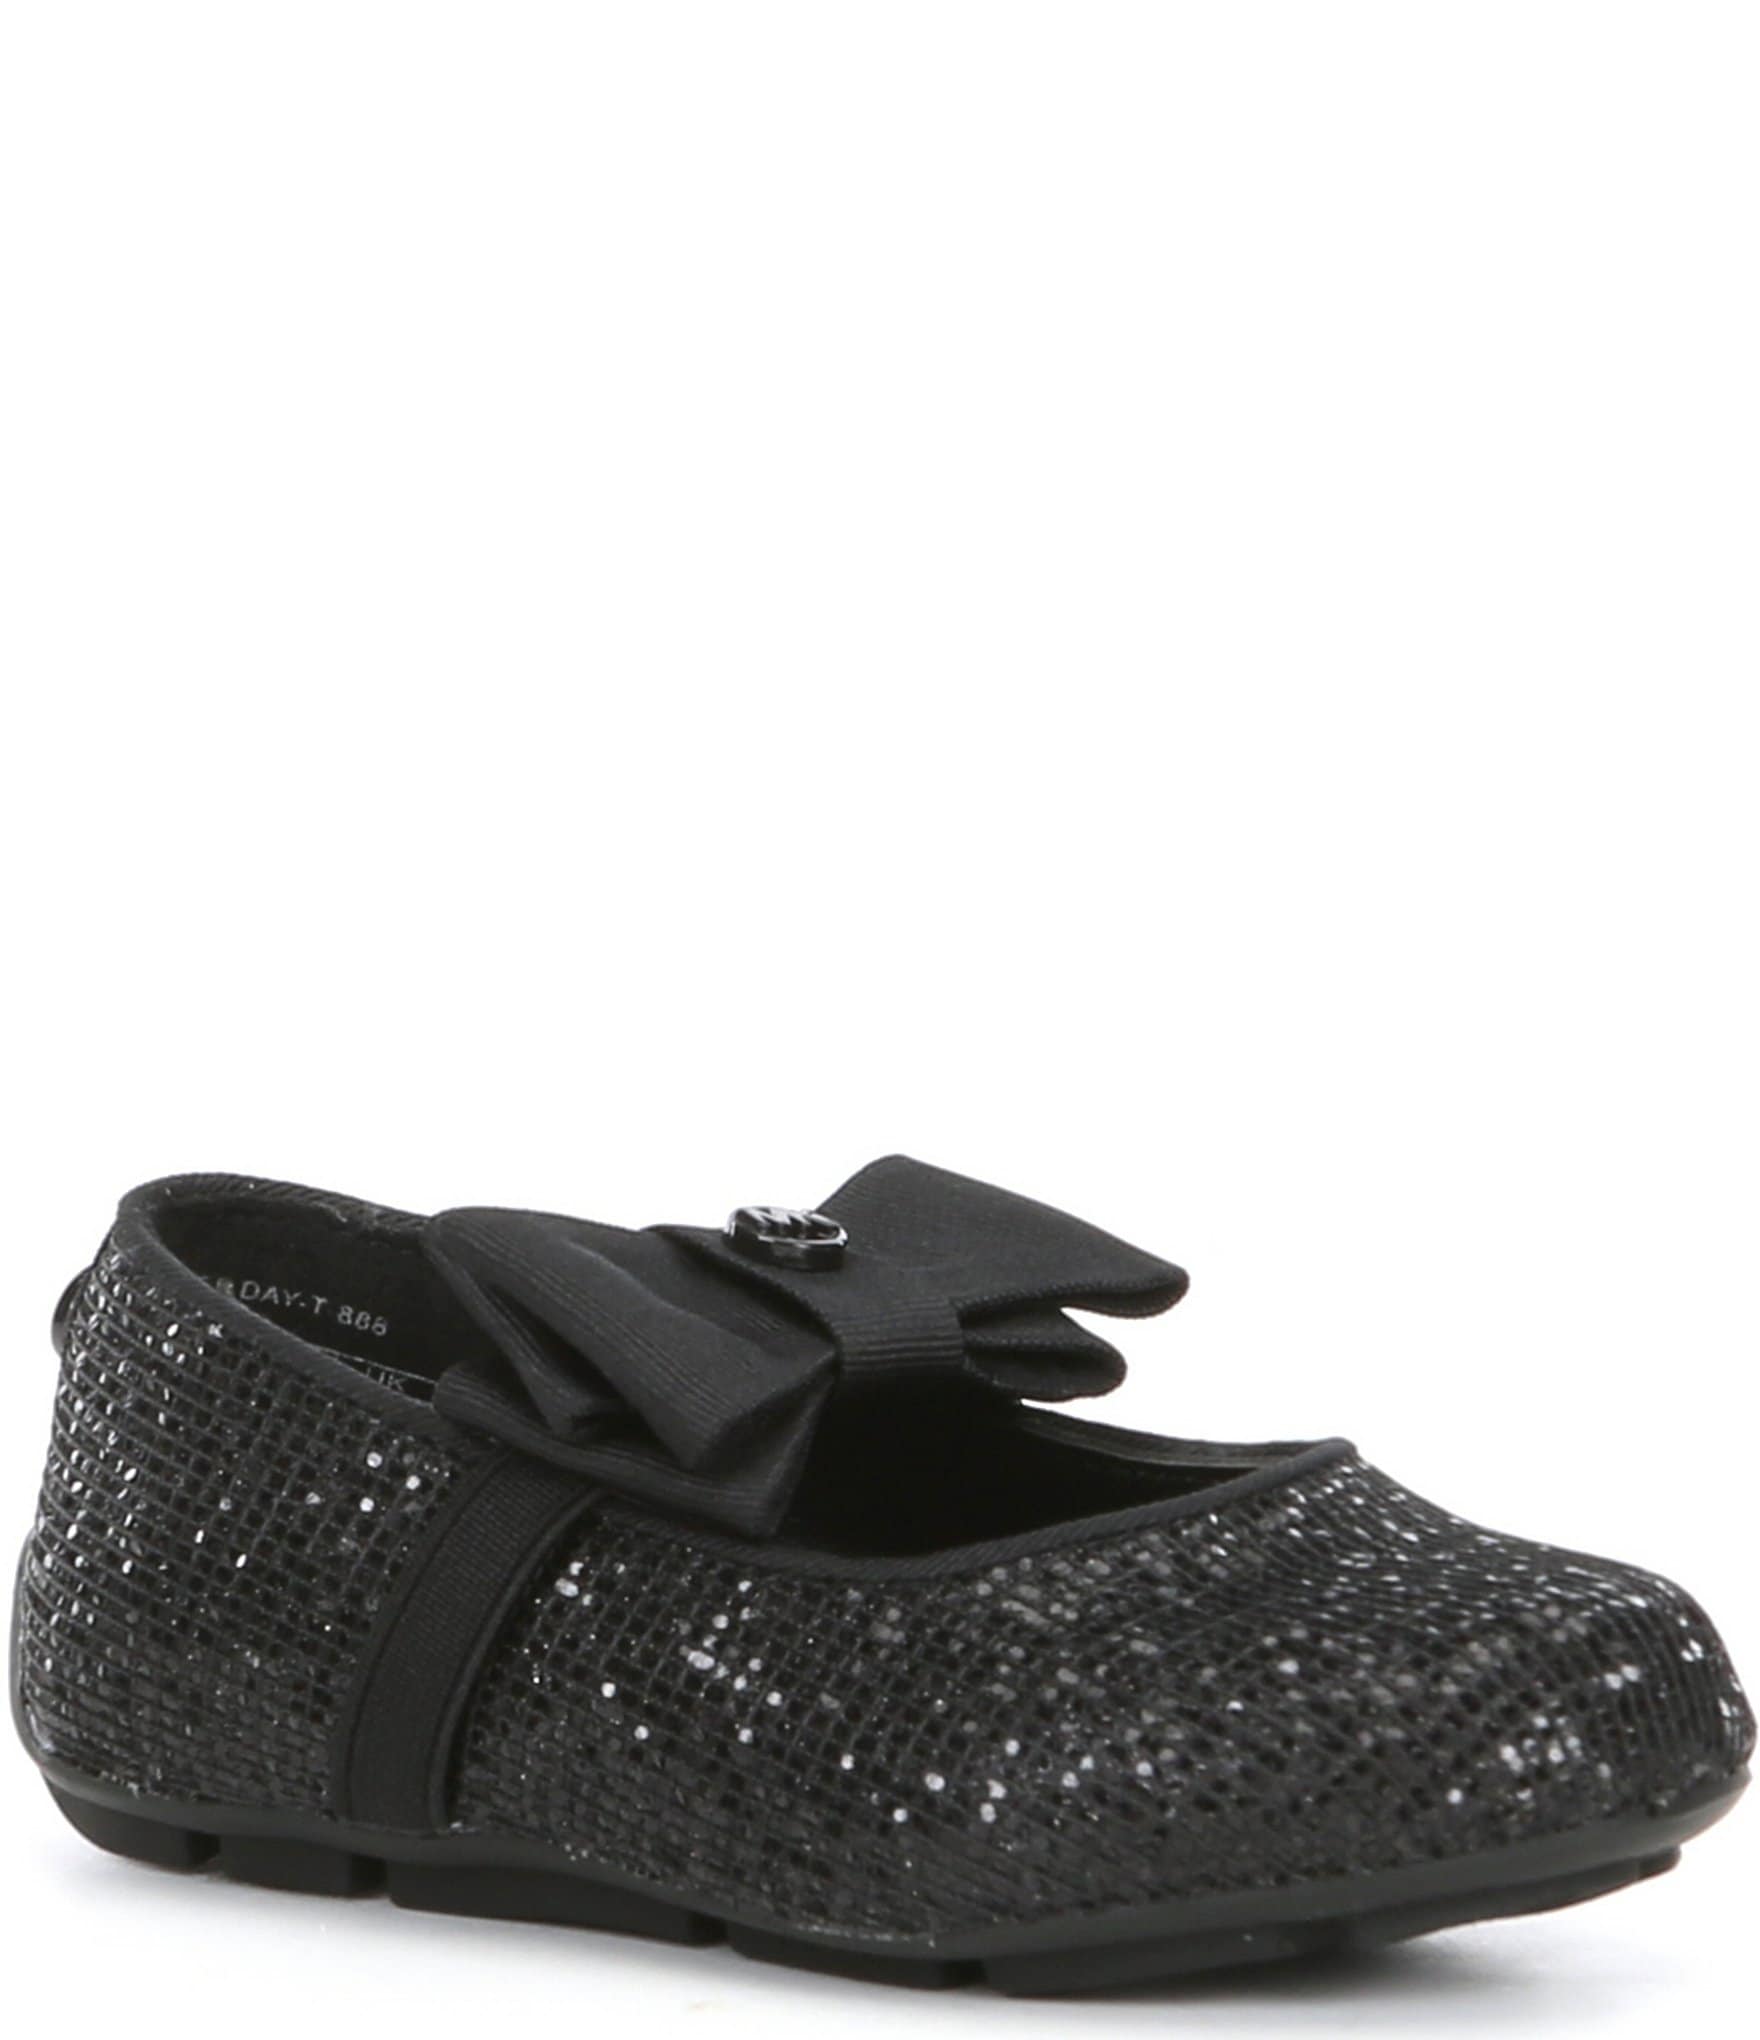 baby girl black shoes size 3